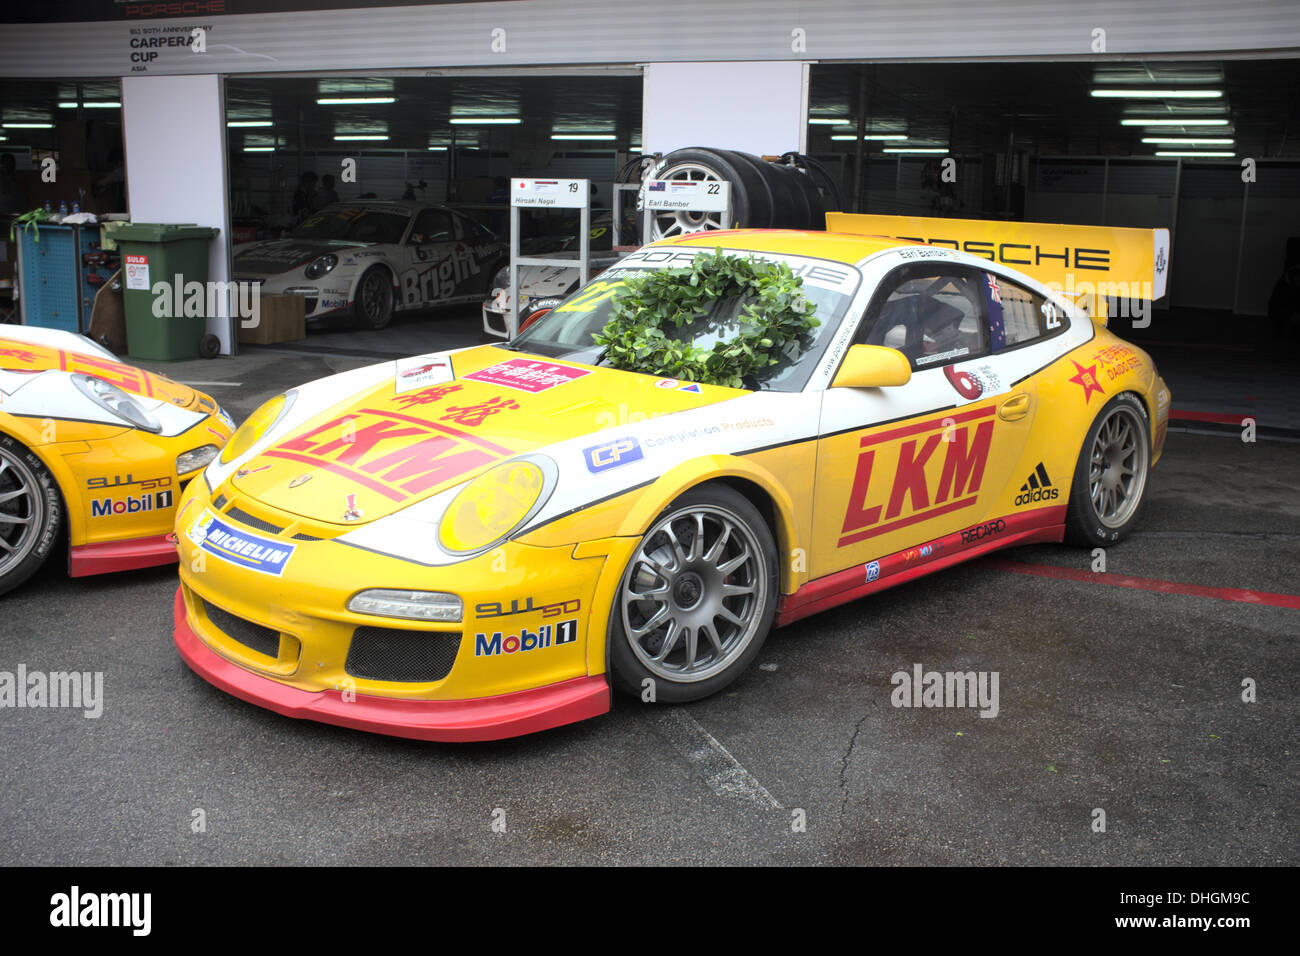 Porsche Carrera with winners wreath parked in Pit lanes at Macau Grand Prix.  Porsche Carrera Cup Asia was run on circuit this day Stock Photo